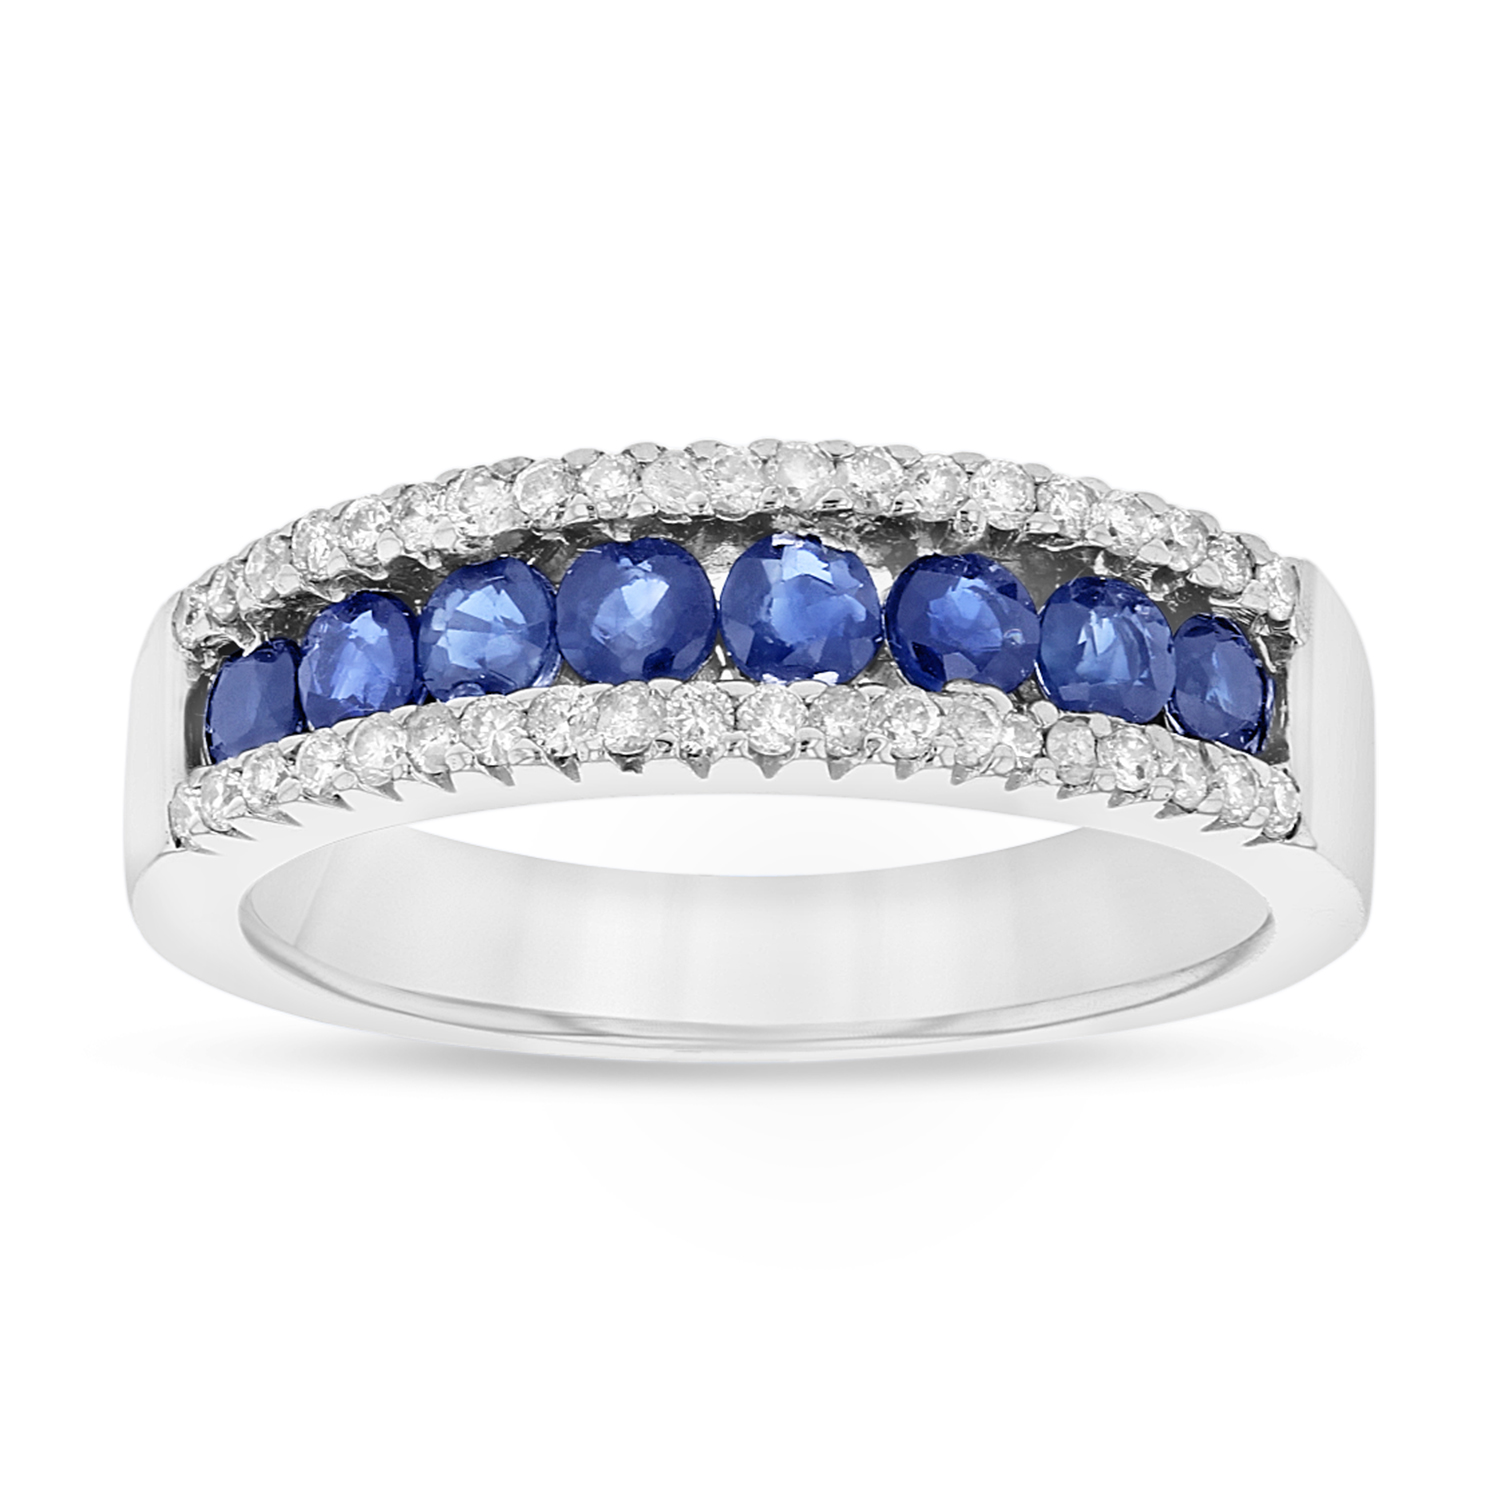 Sapphire and Diamond Wedding Band in 14k White Gold